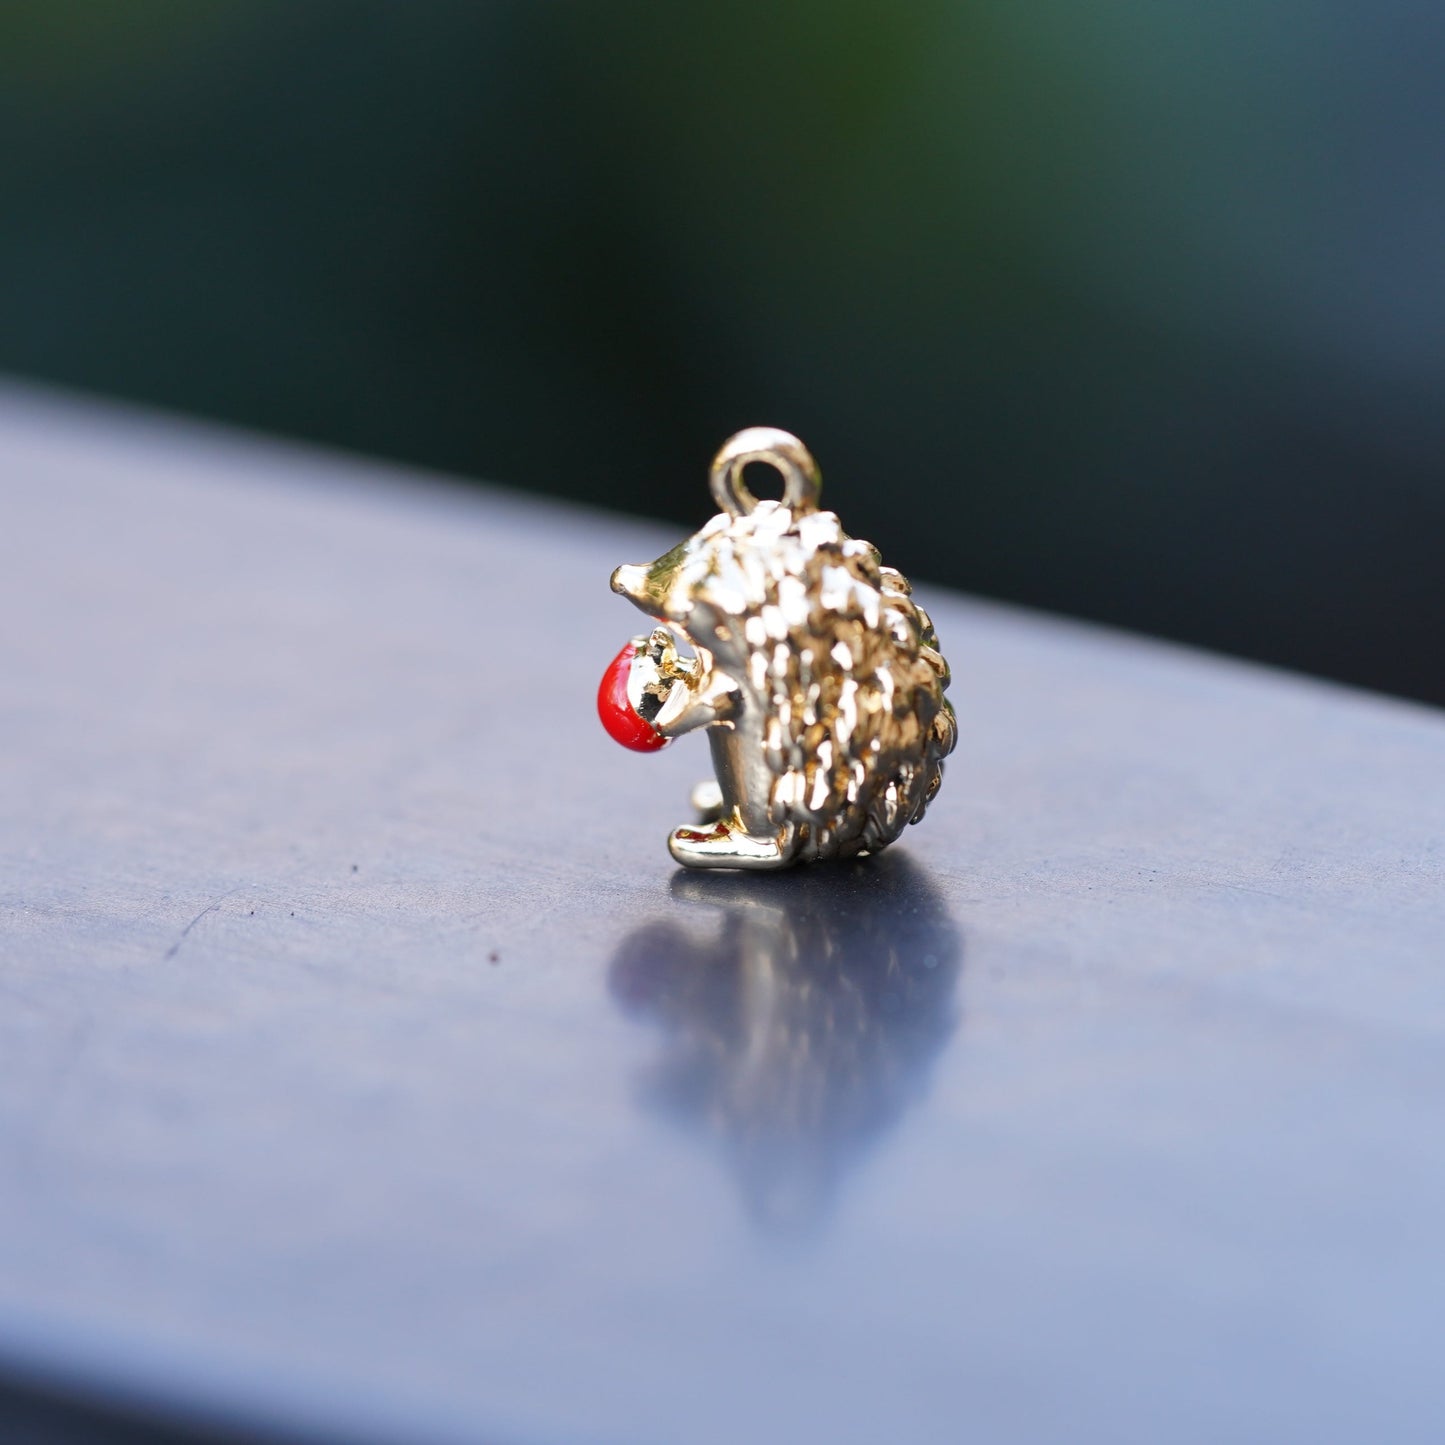 1pc Cute Hedgehog Charm for Jewelry Making Necklace Pendant Diy Supplies Bracelet Phone Craft Accessories Gold Plated